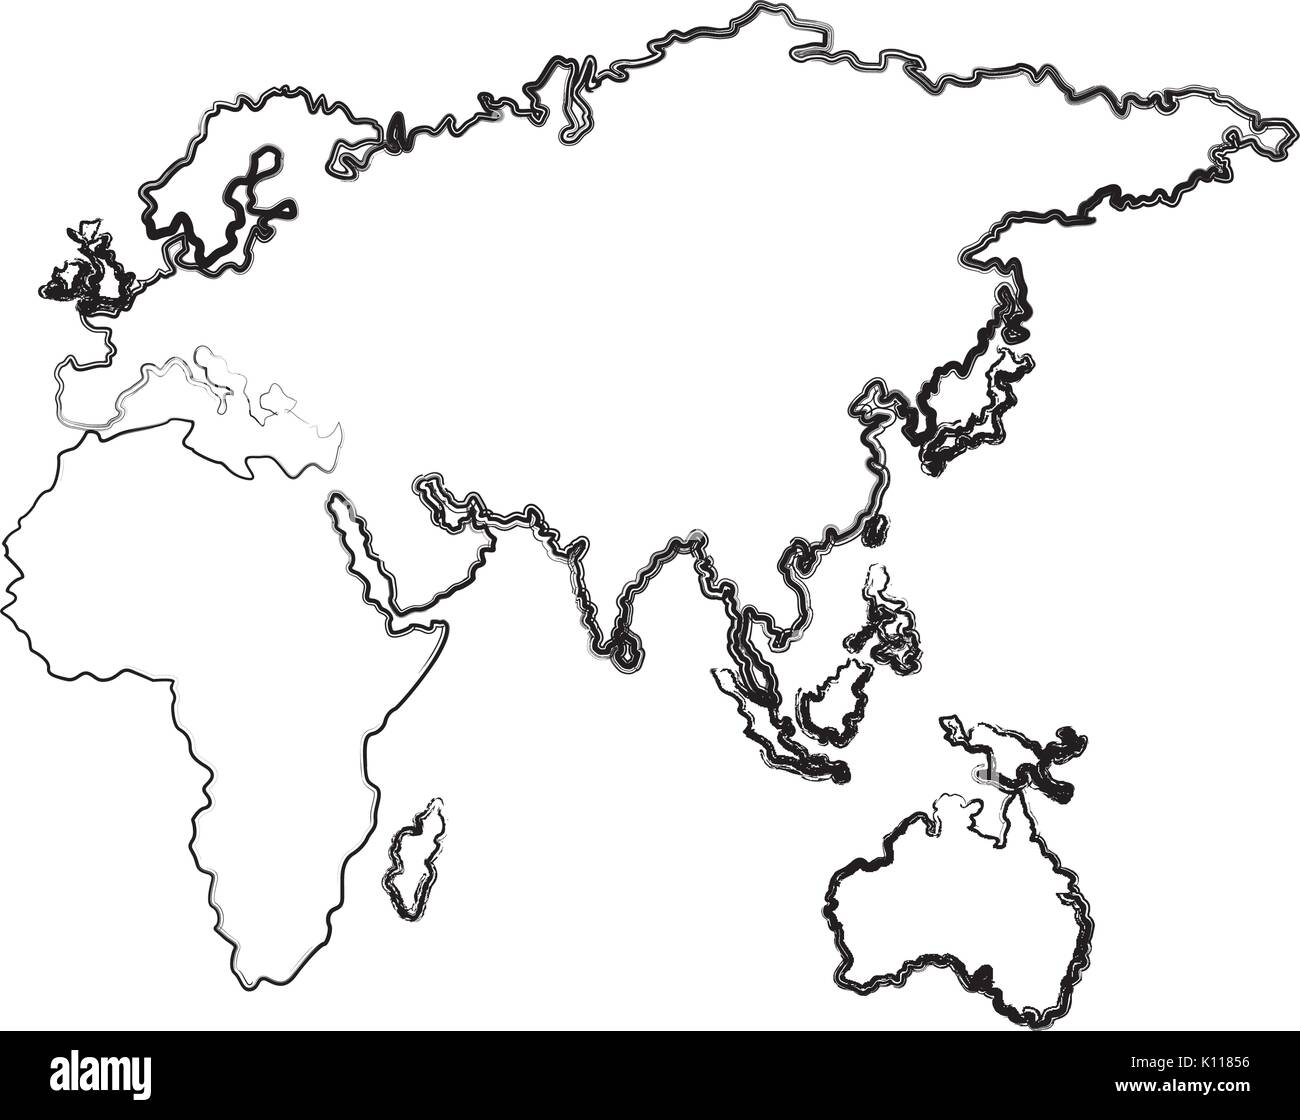 Africa Map Black And White Stock Photos Images Alamy